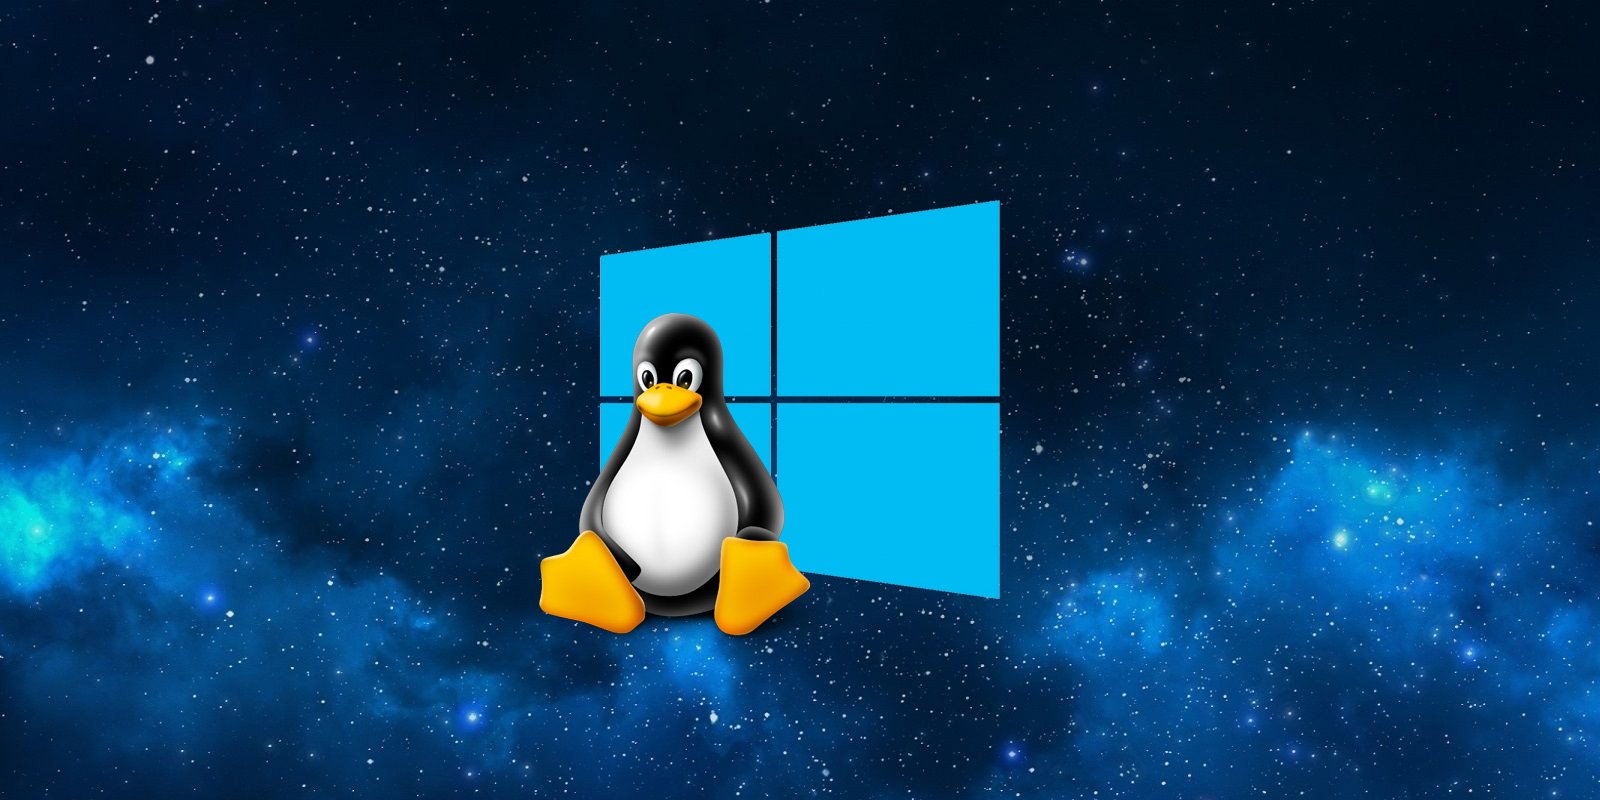 Hands on with WSLg: Running Linux GUI apps in Windows 10